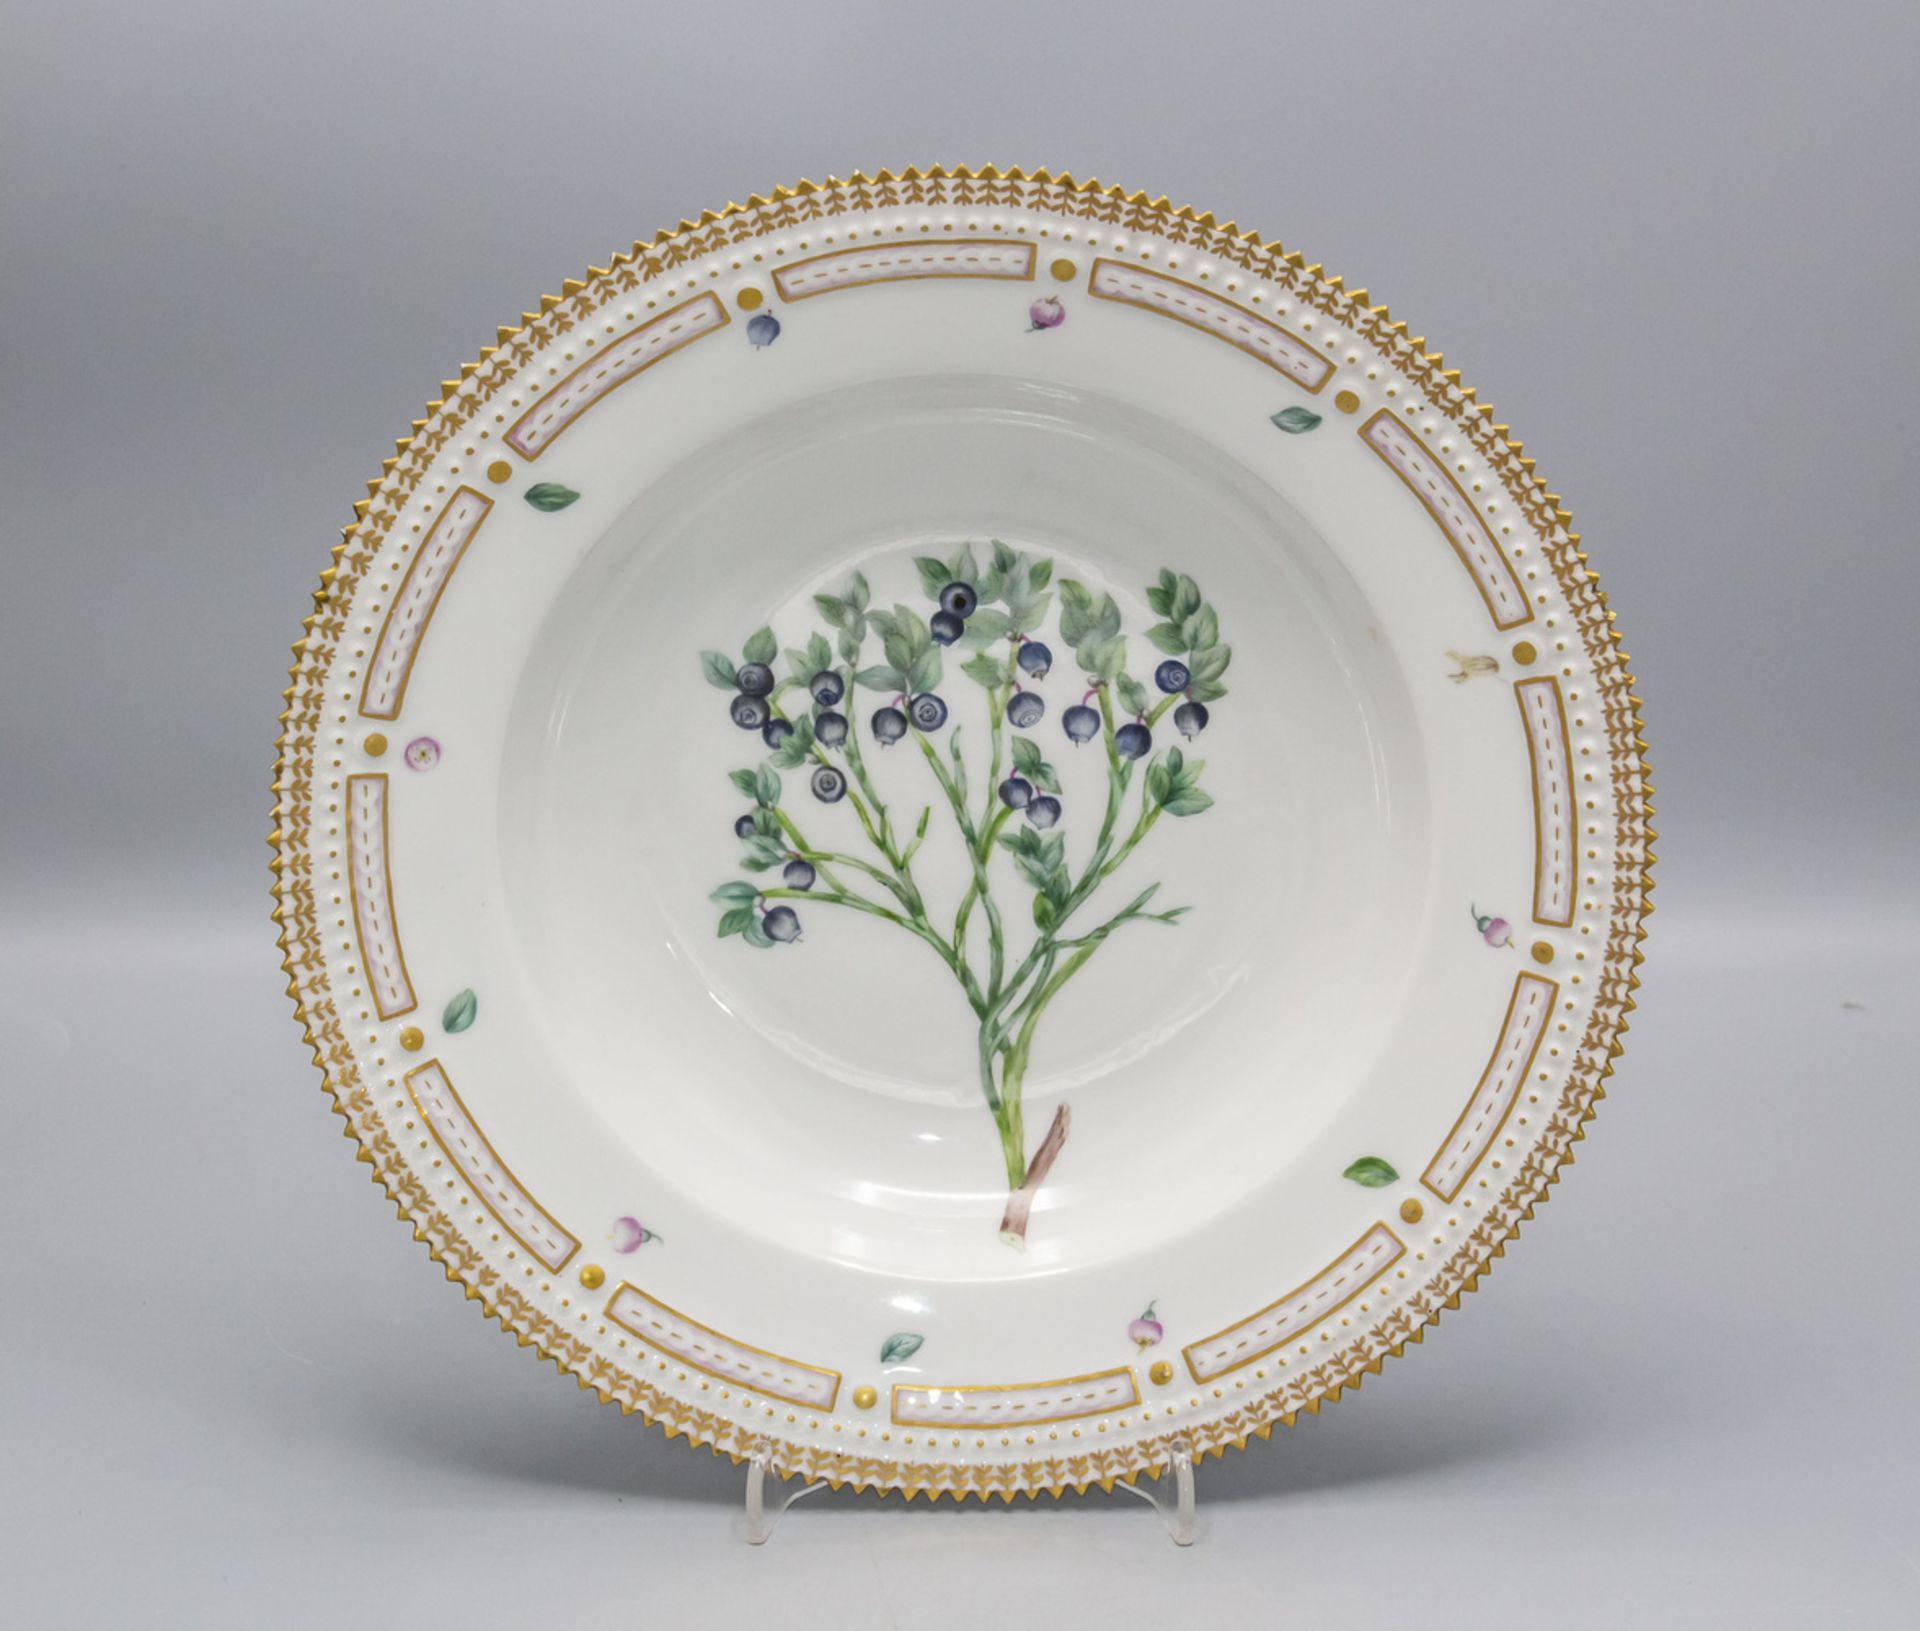 Teller mit Stachelbeerzweig / A plate with a gooseberry branch, Flora Danica, Royal ...